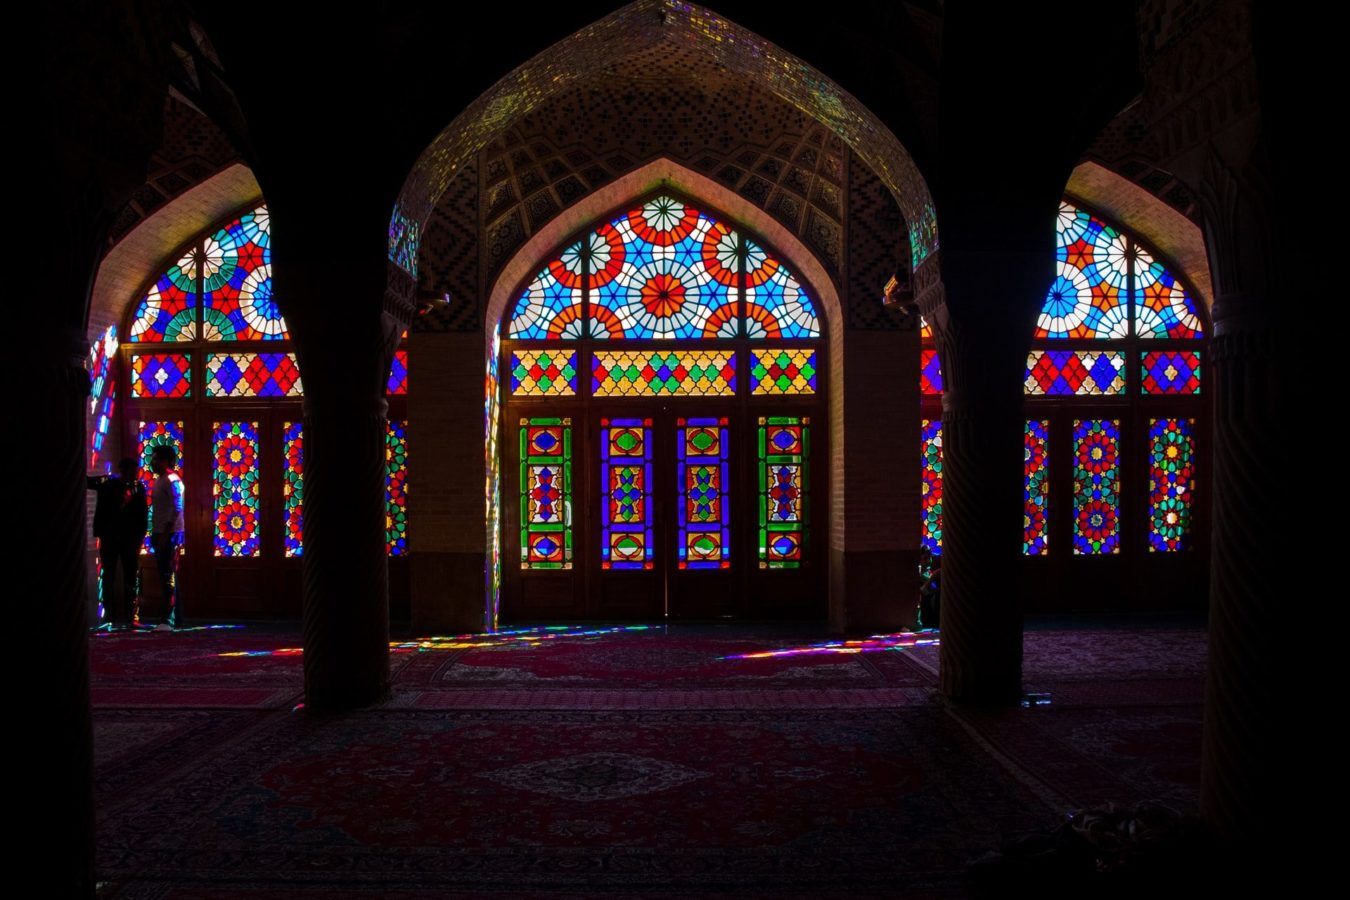 10 of the most magnificent mosques around the world